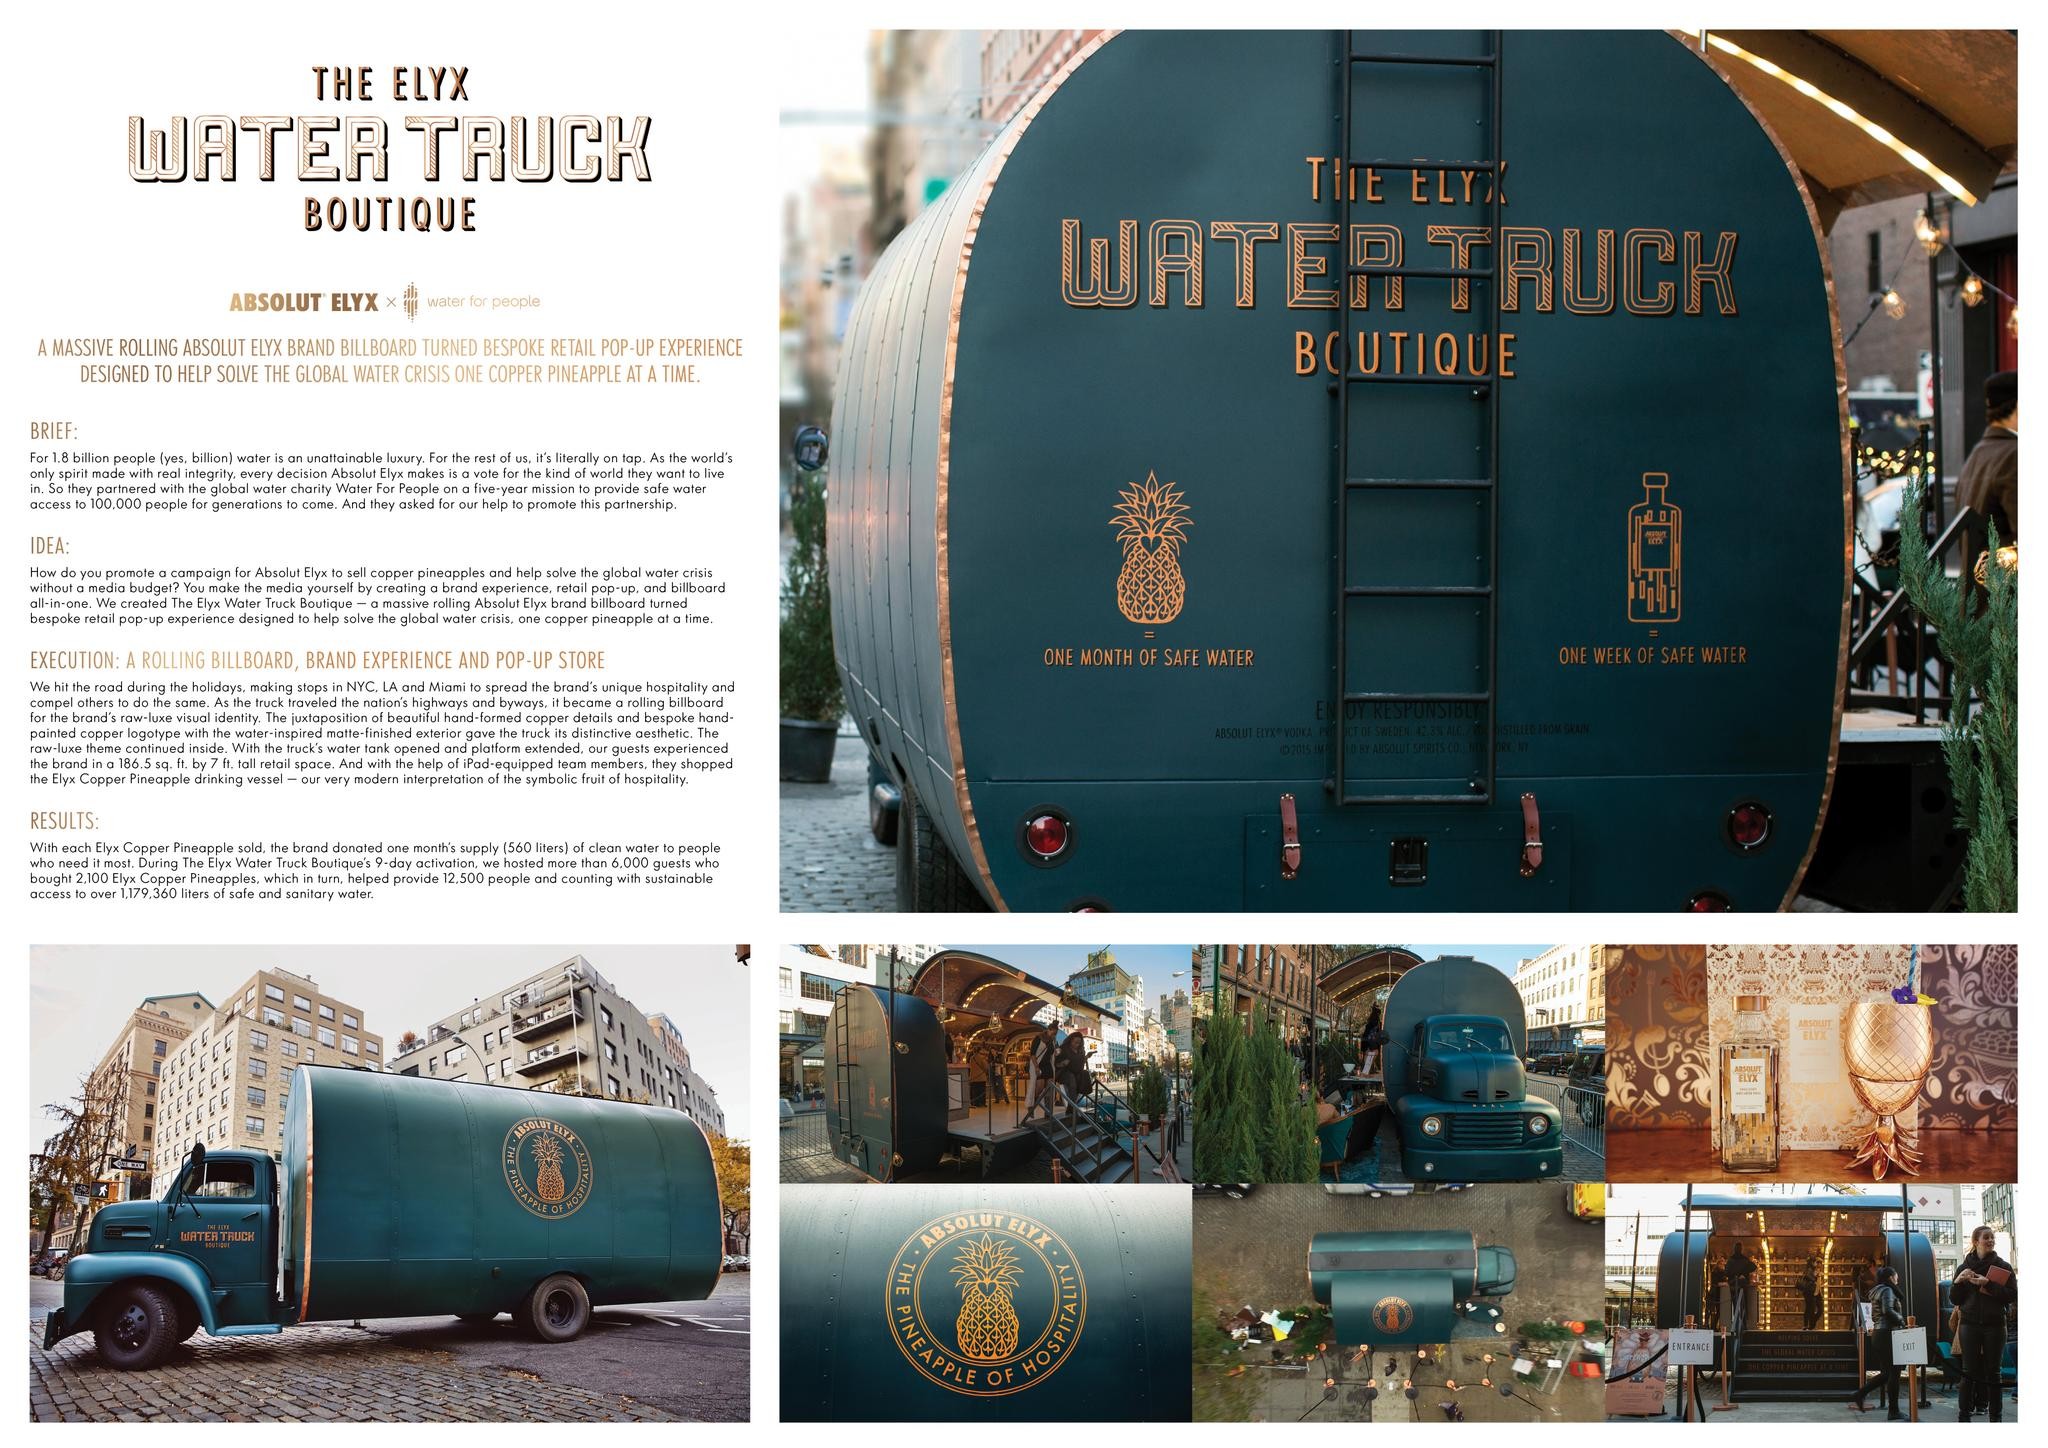 The Elyx Water Truck Boutique